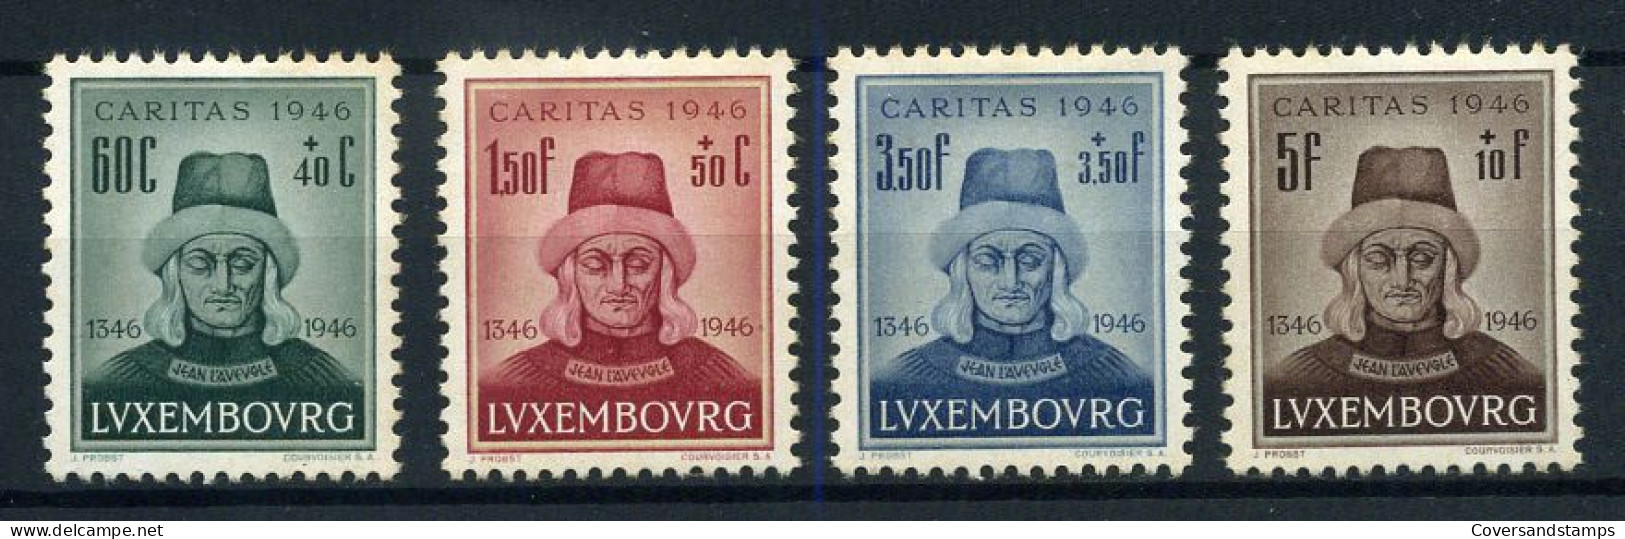 Luxembourg - 388/91 - Caritas 1946 - MH * - Unused Stamps